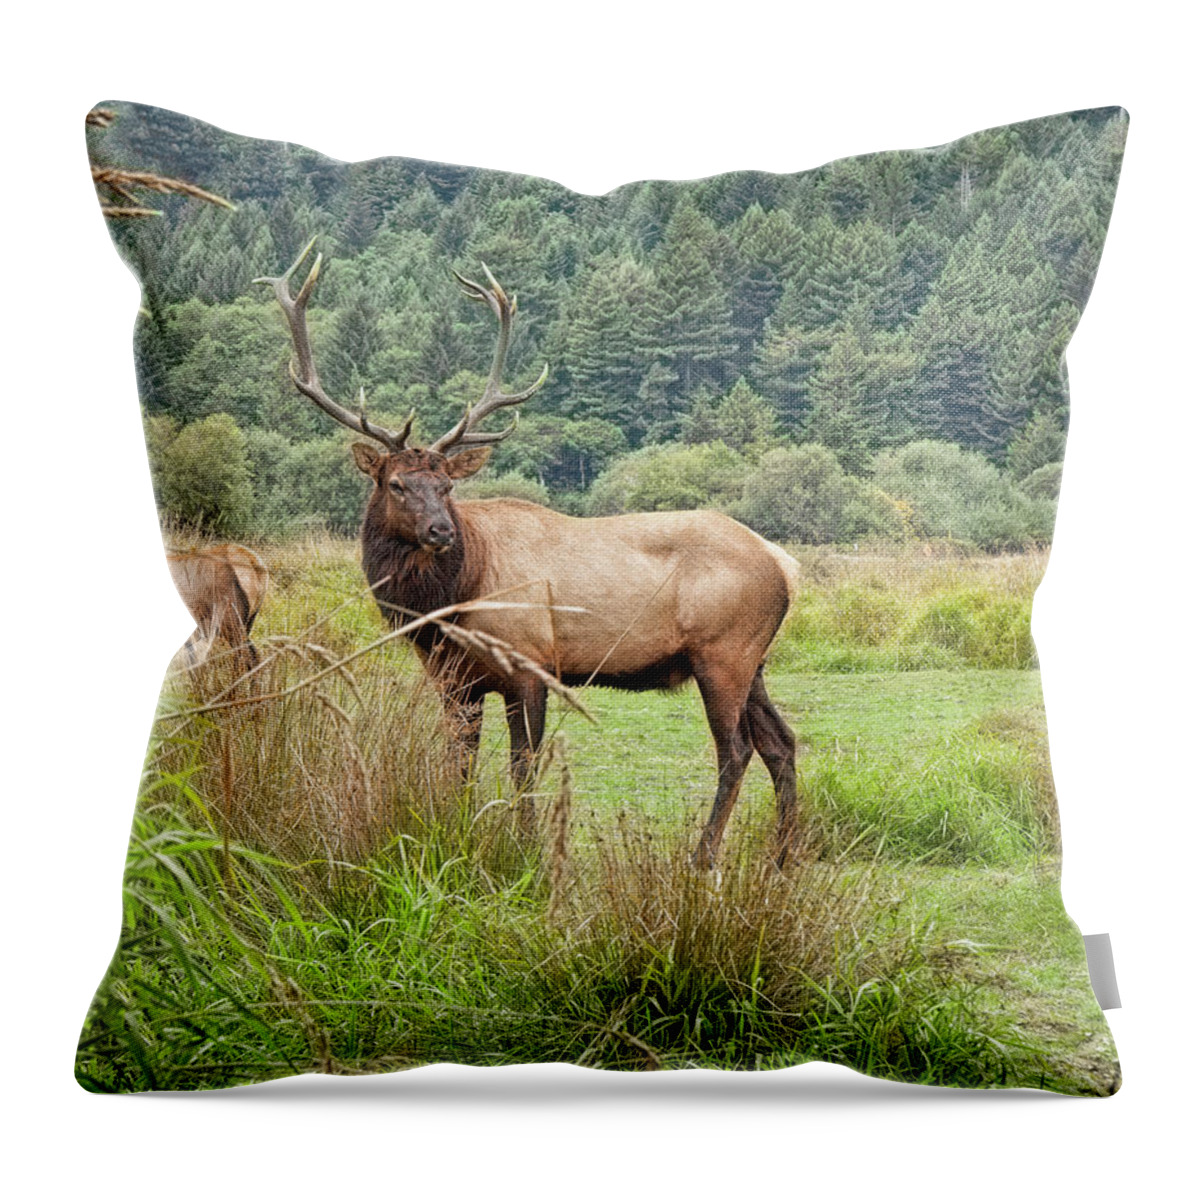 Landscape Throw Pillow featuring the photograph The Leader by John M Bailey